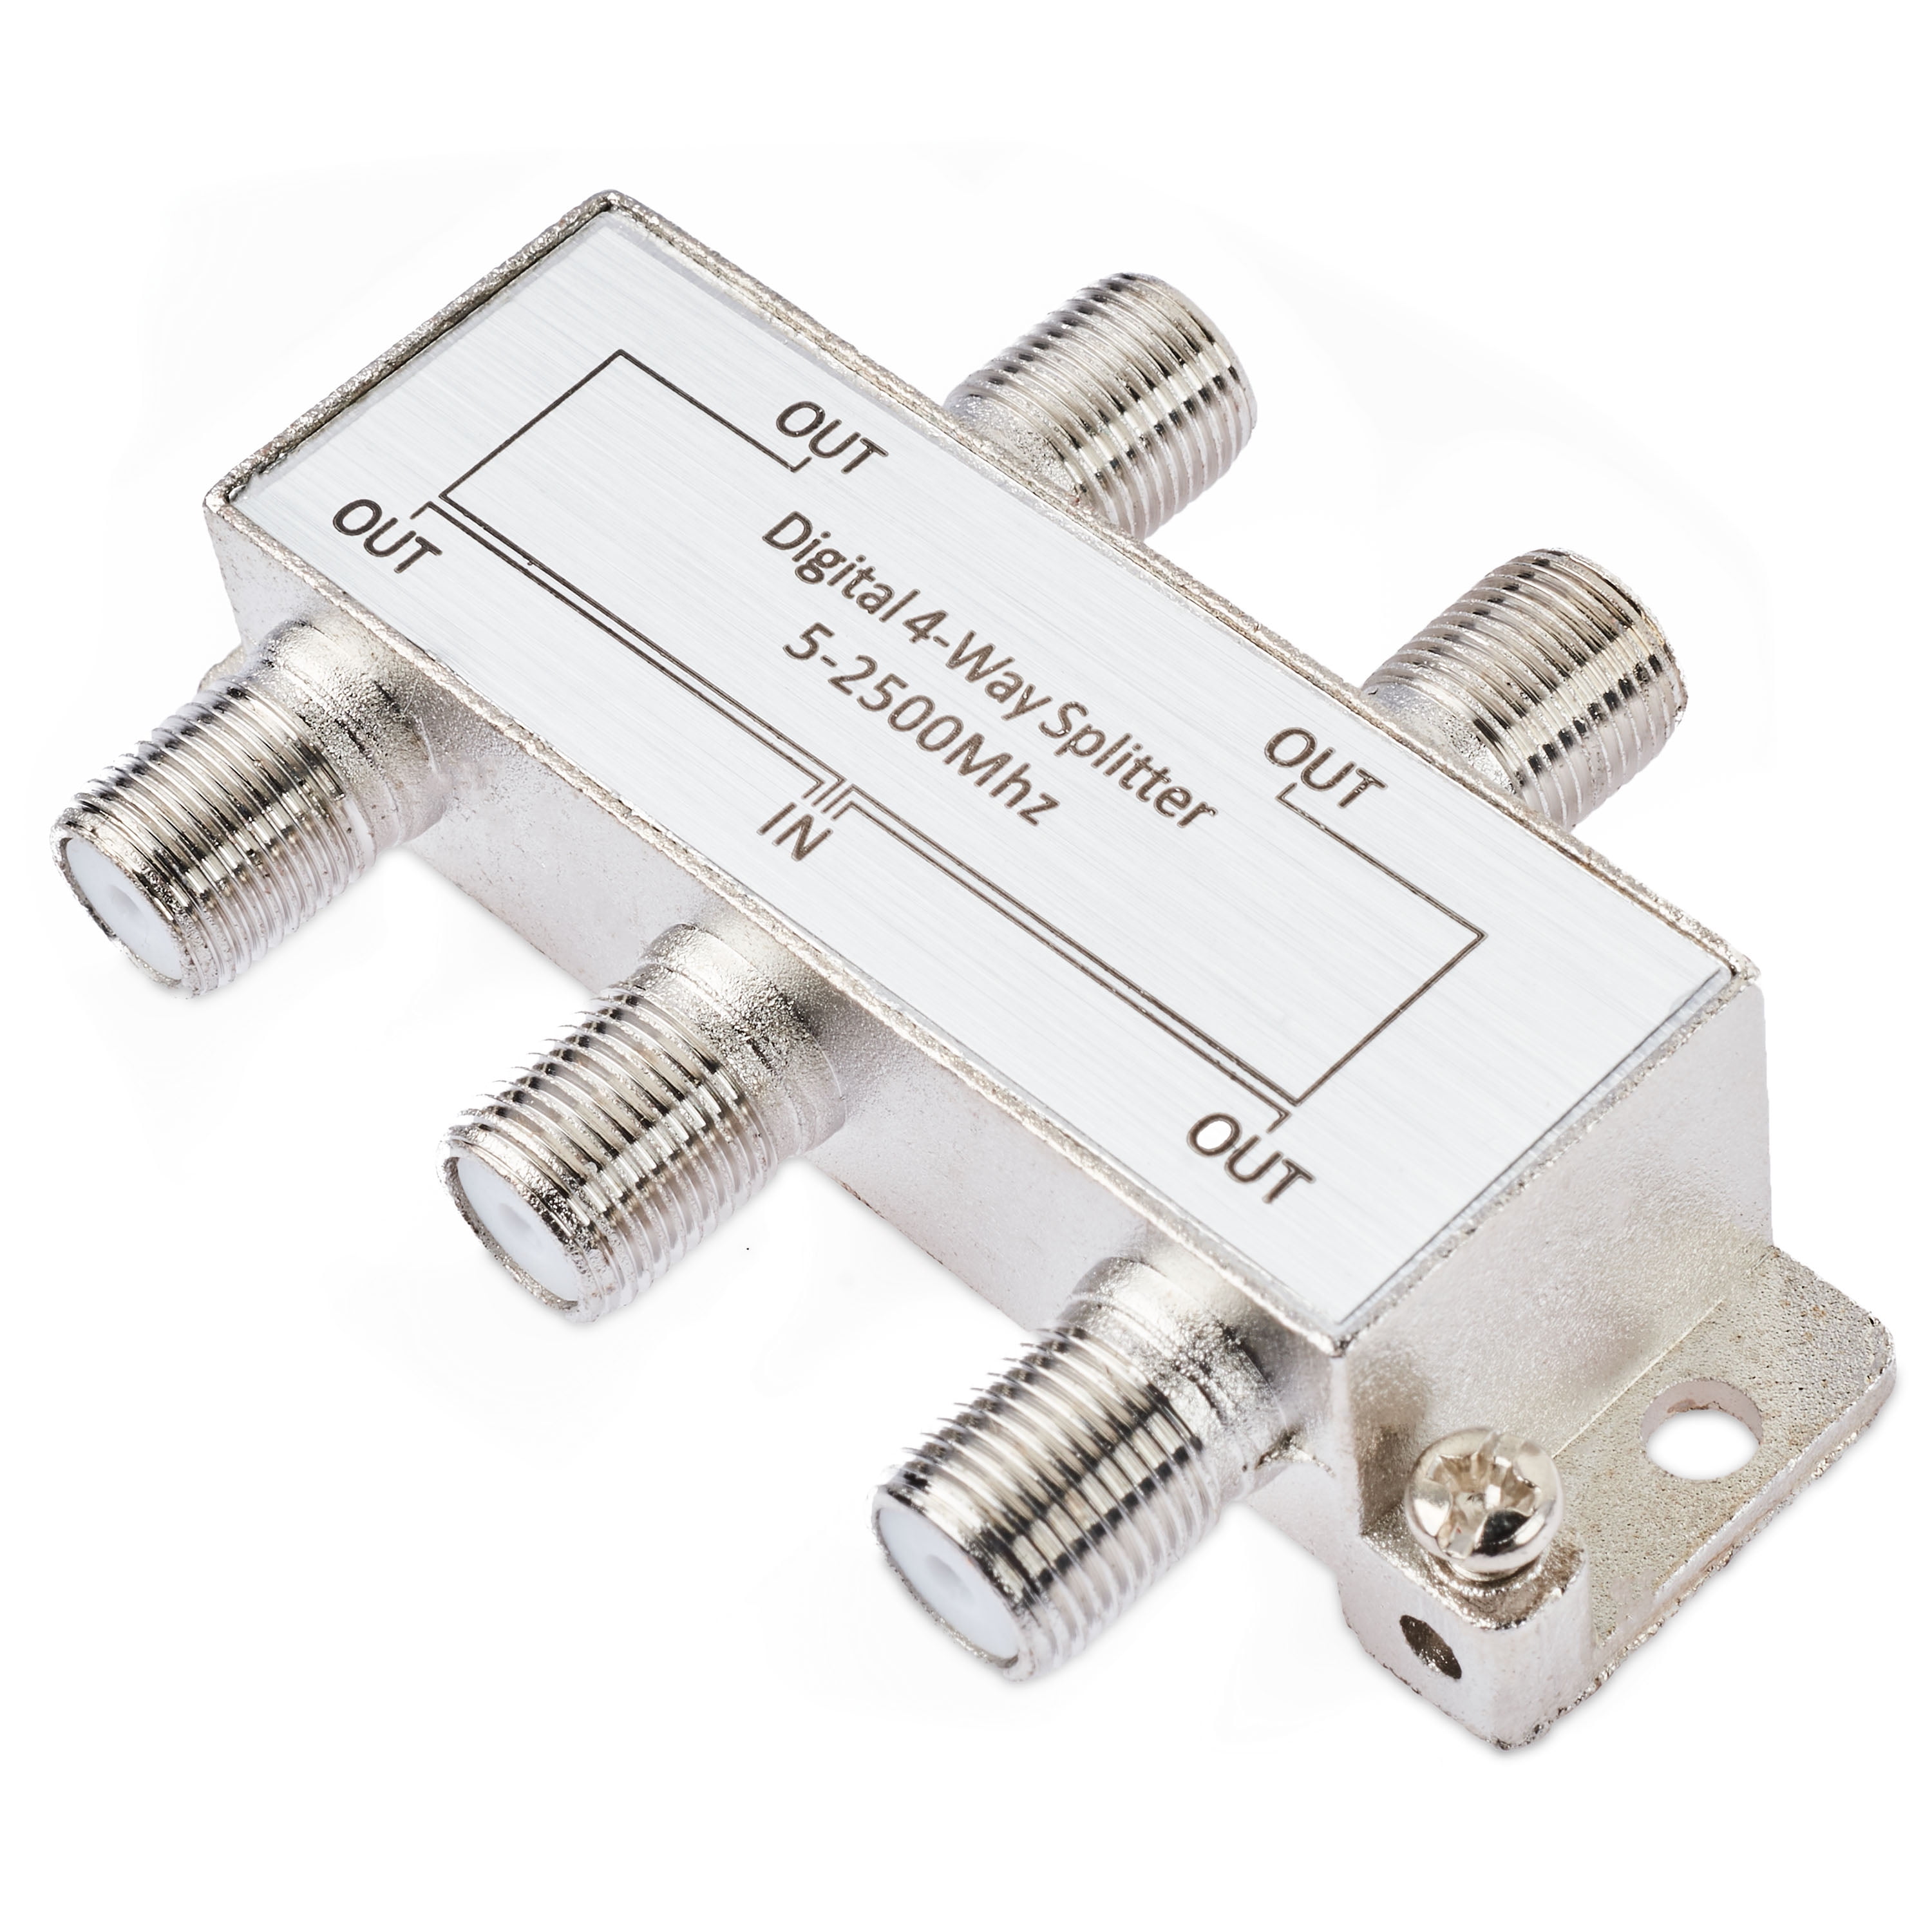 onn. 4 Way Digital Coax Cable Splitter with Gold Plated Connectors, Silver